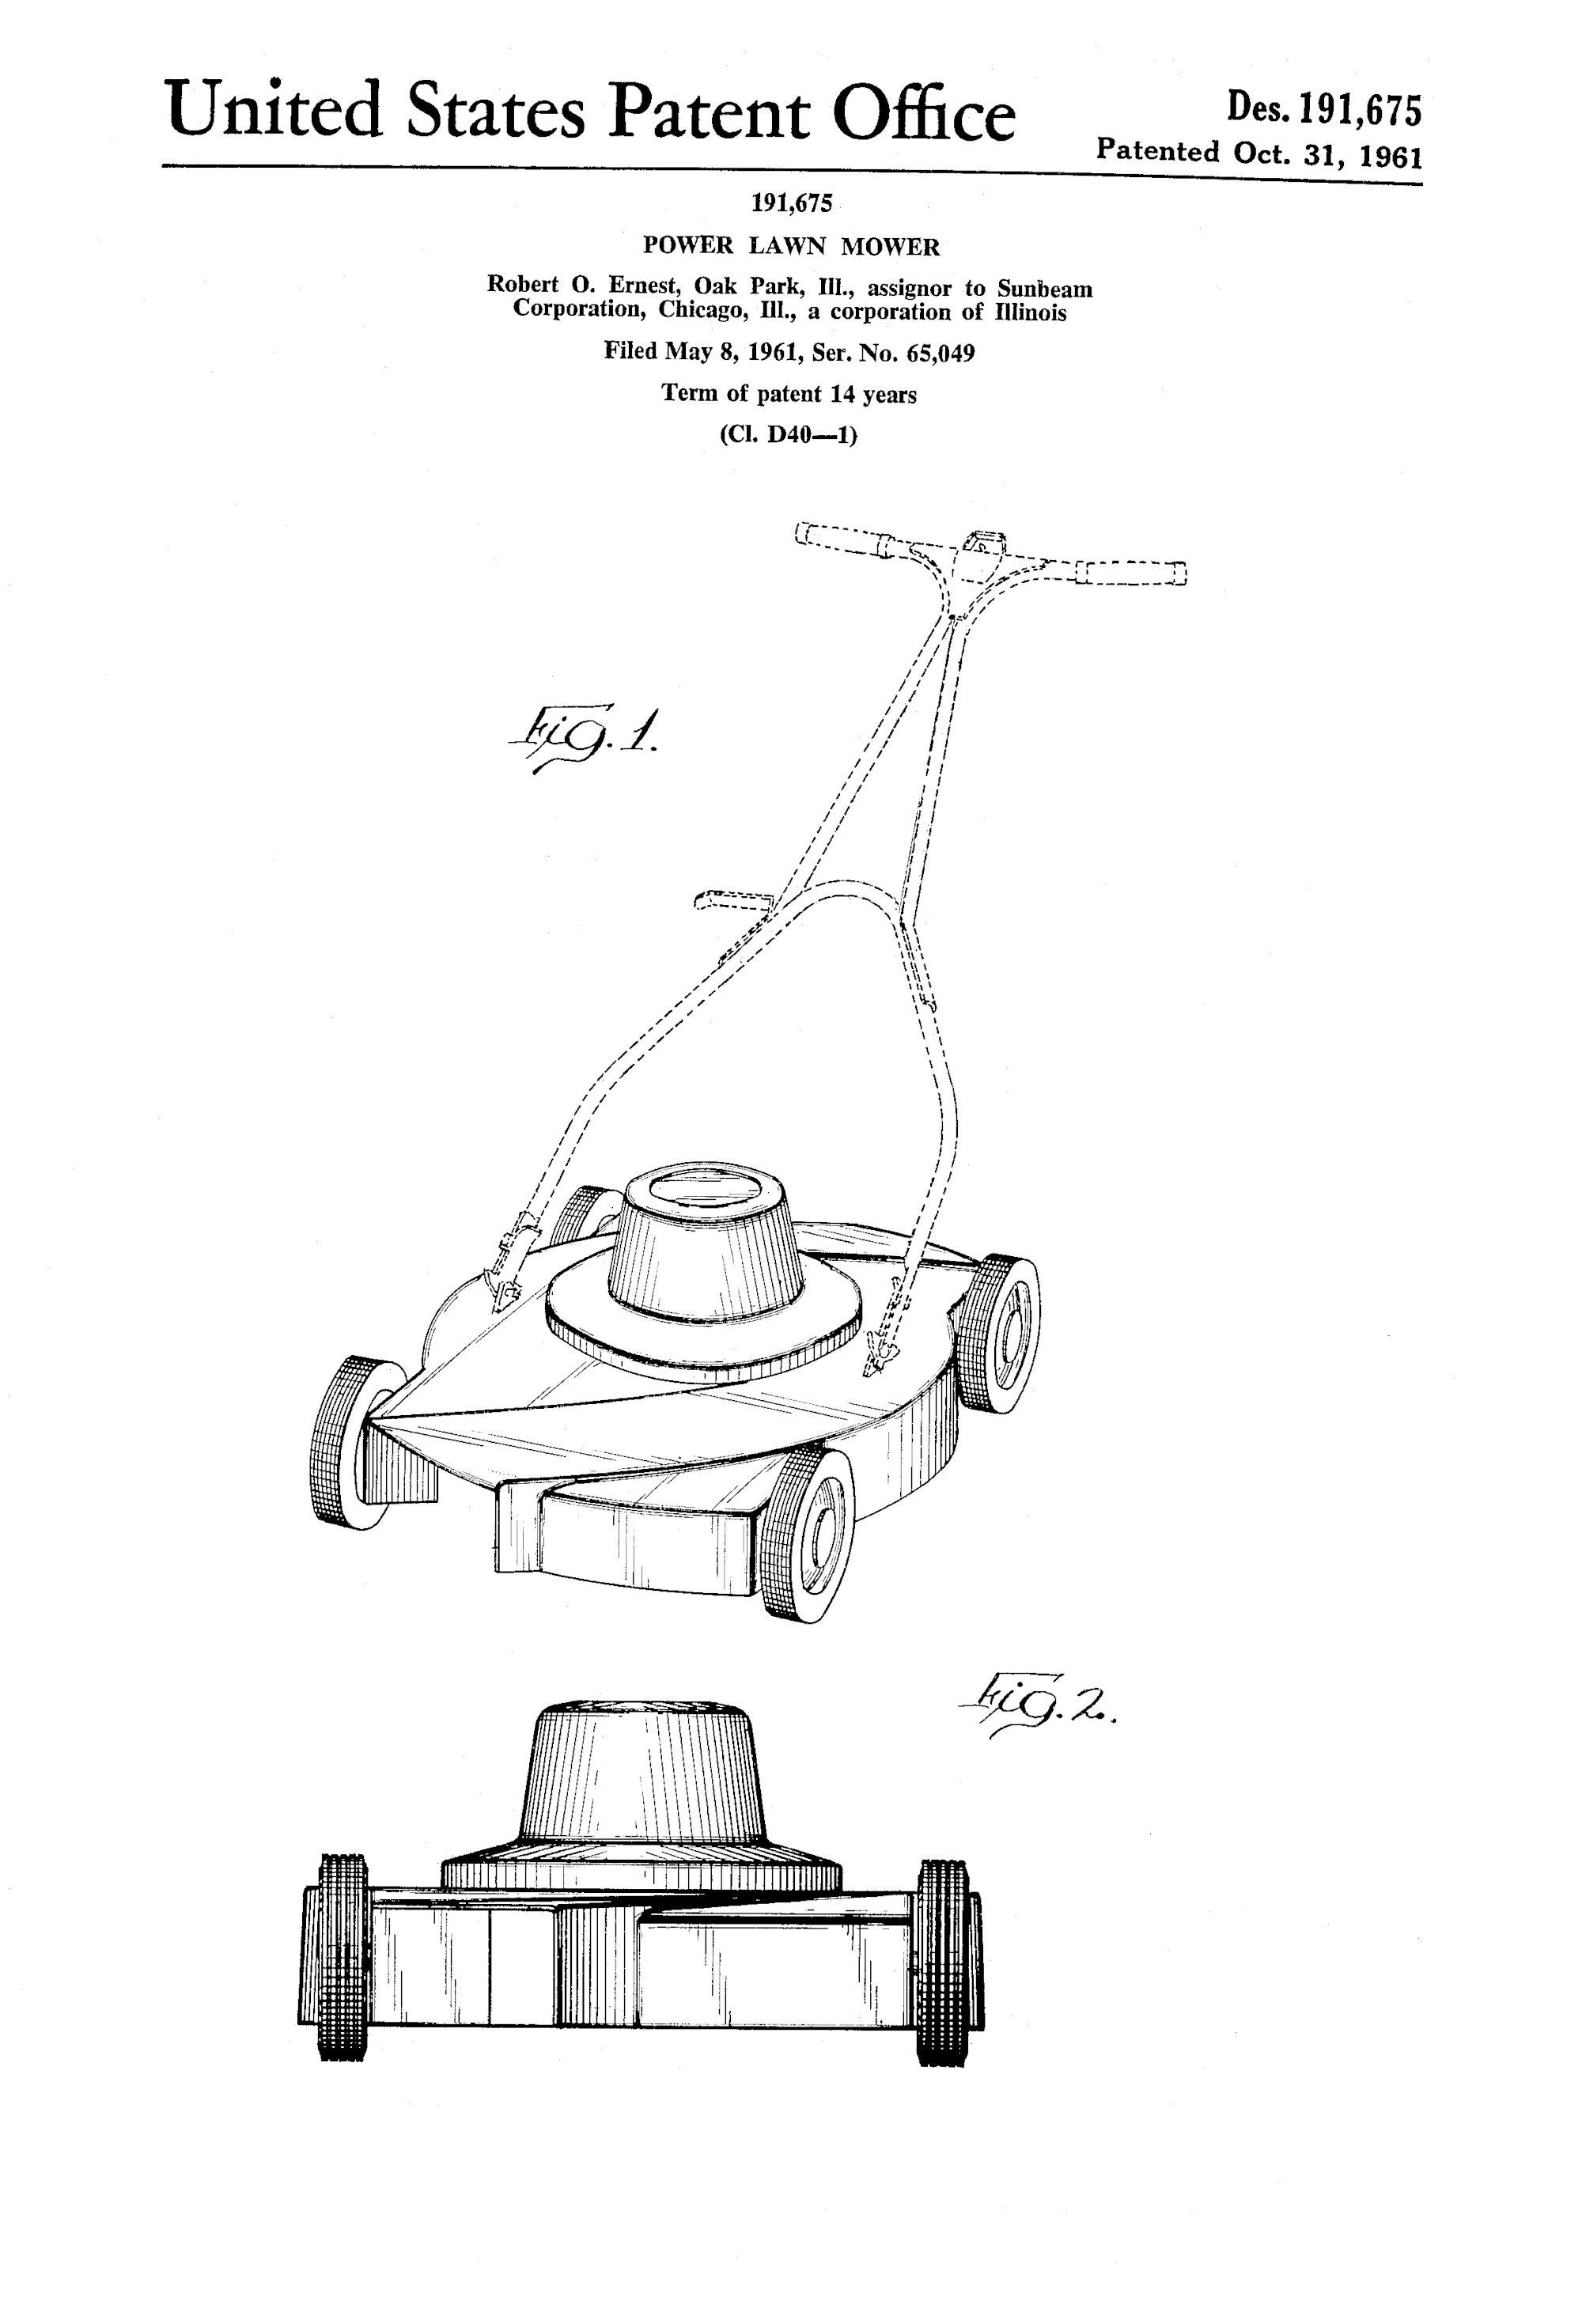 Power Lawn Mower, Robert O. Ernest, for Sunbeam Corporation, 1961. Patent Number: USD 191,675, U.S. Patent Office 